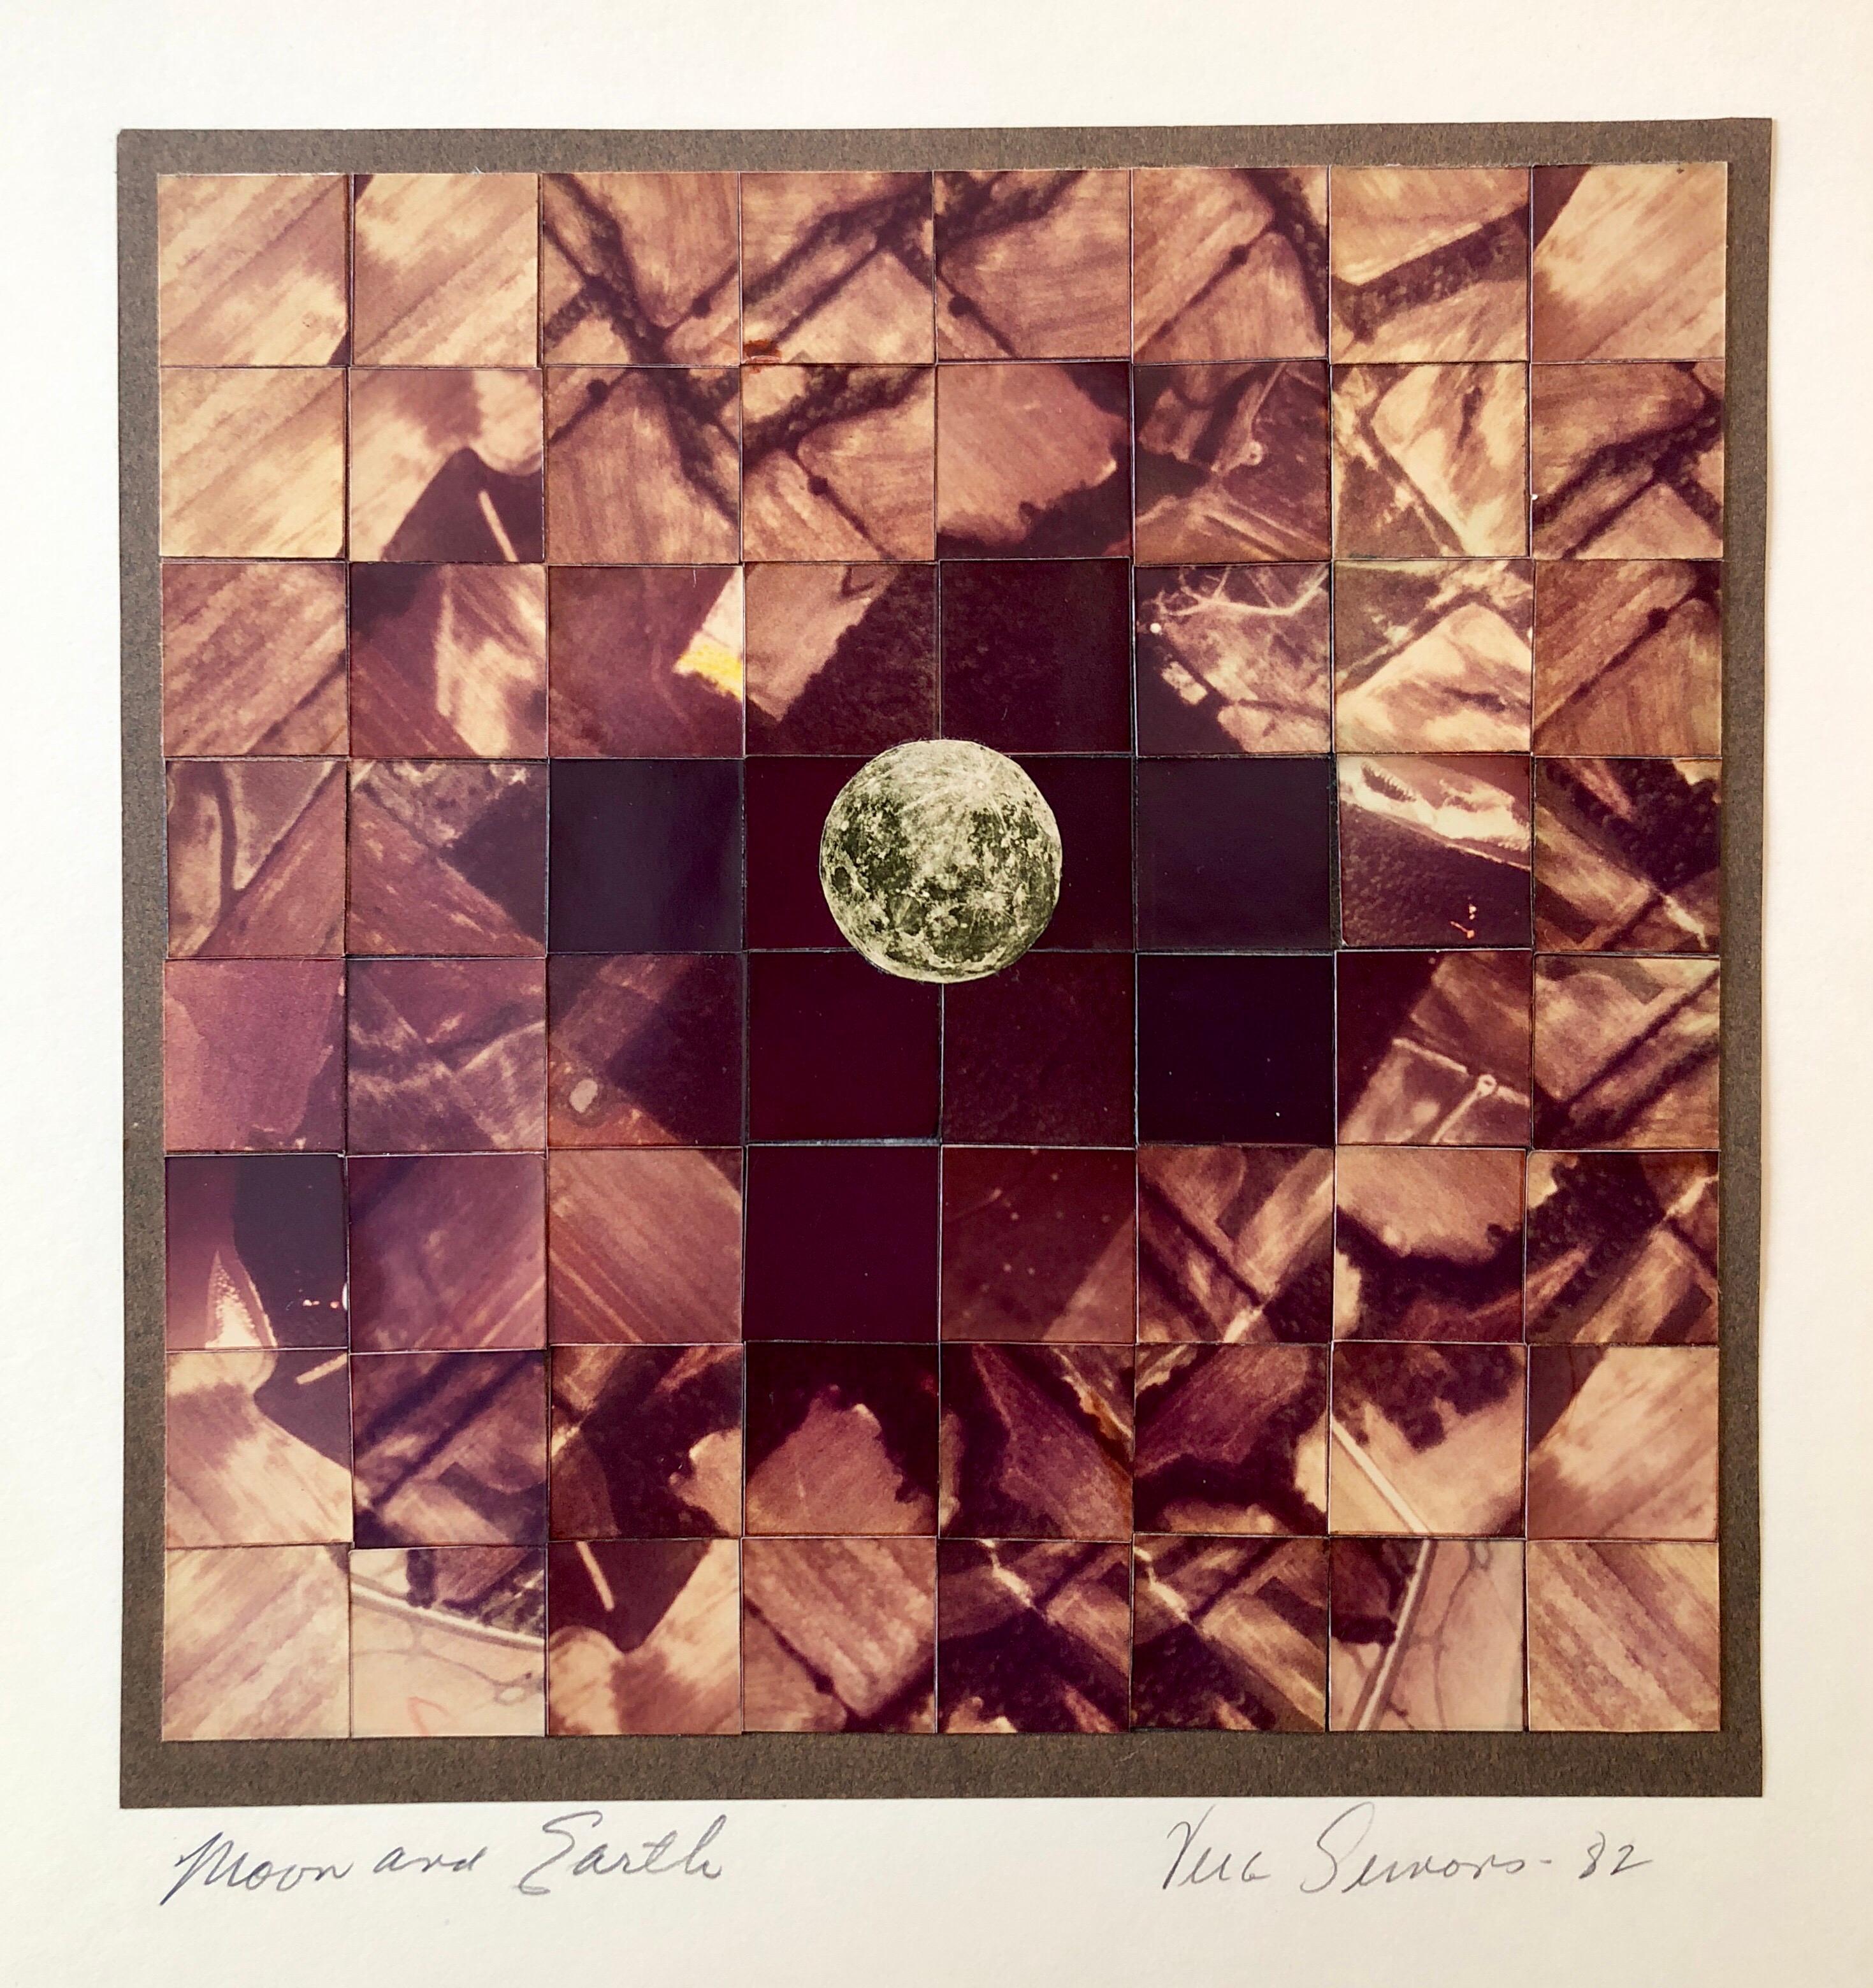 Vera Simons Color Photograph - Moon and Earth Assemblage, Photo Mosaic Collage Photograph, Feminist Aviator